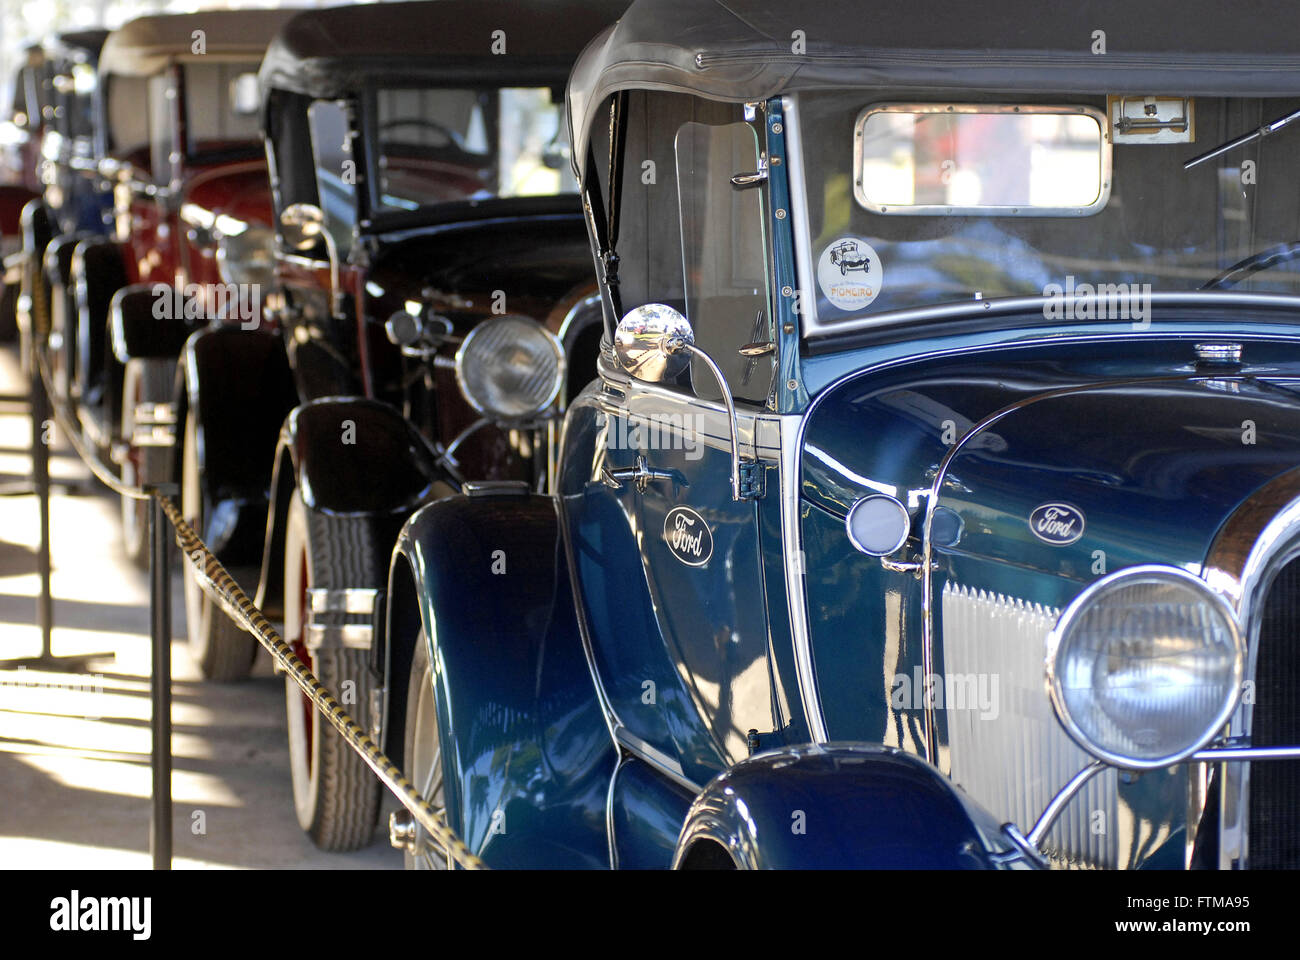 Exhibition of old vehicles from the Ford brand Stock Photo